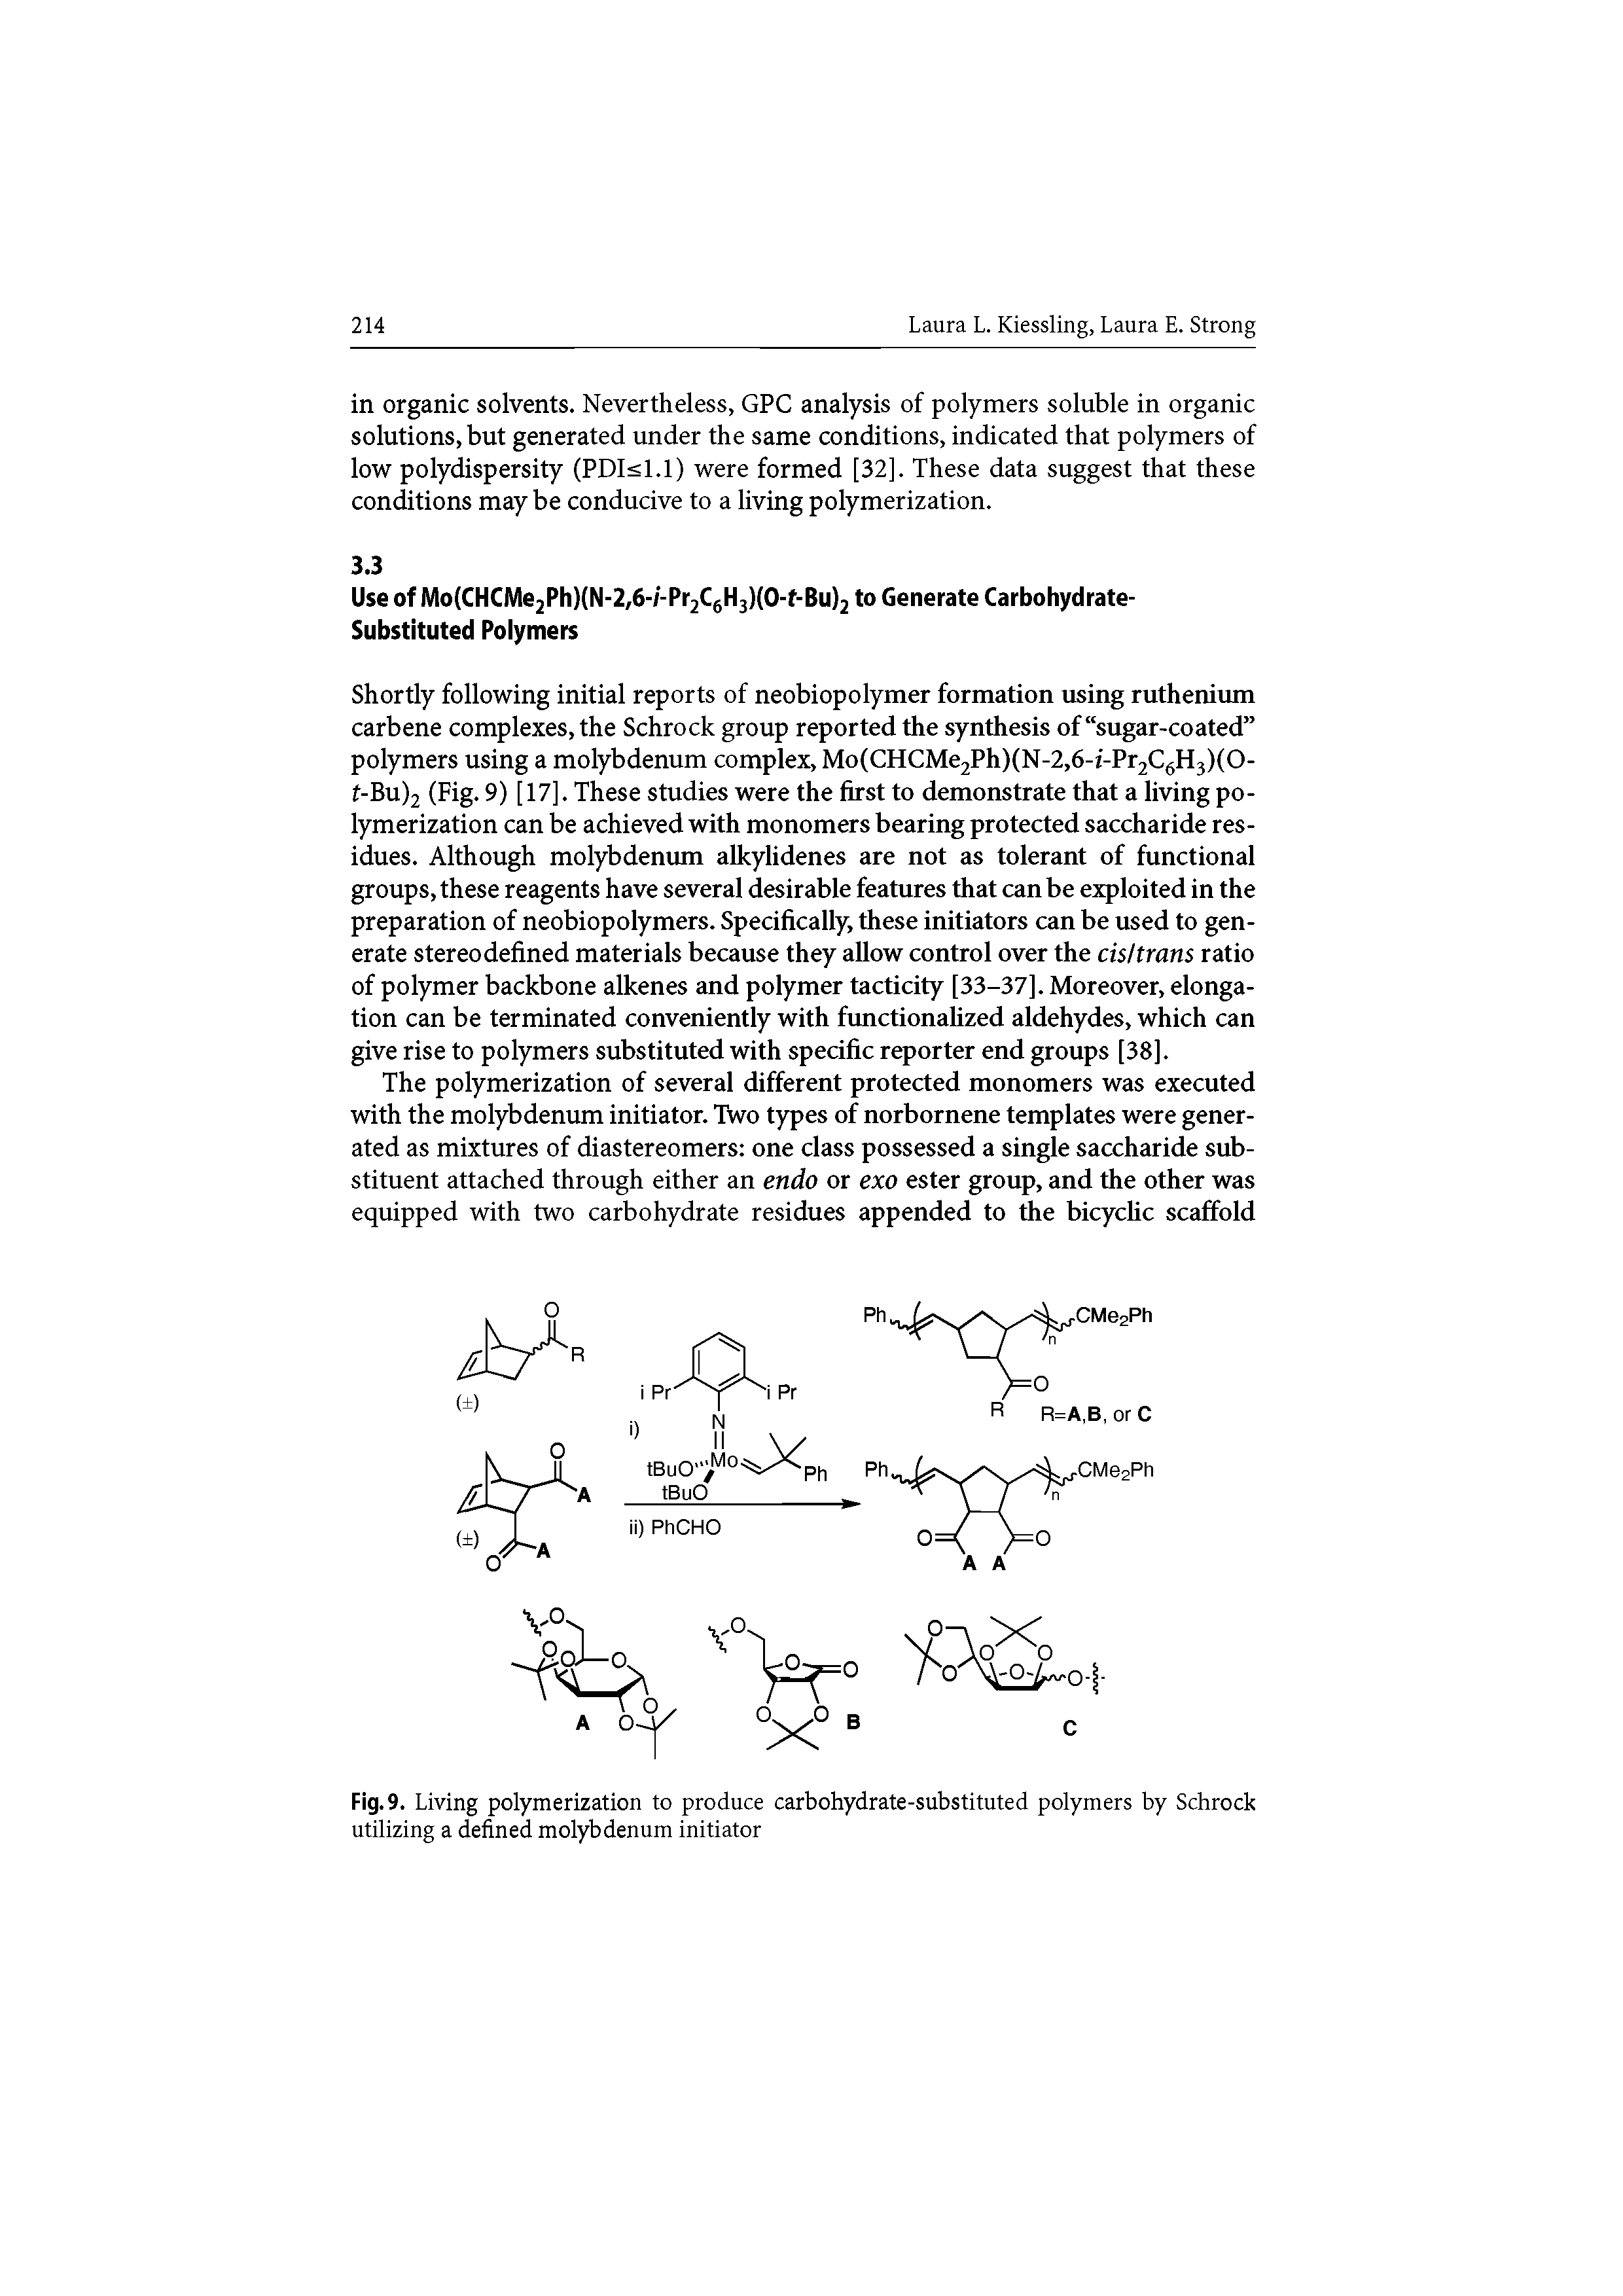 Fig. 9. Living polymerization to produce carbohydrate-substituted polymers by Schrock utilizing a defined molybdenum initiator...